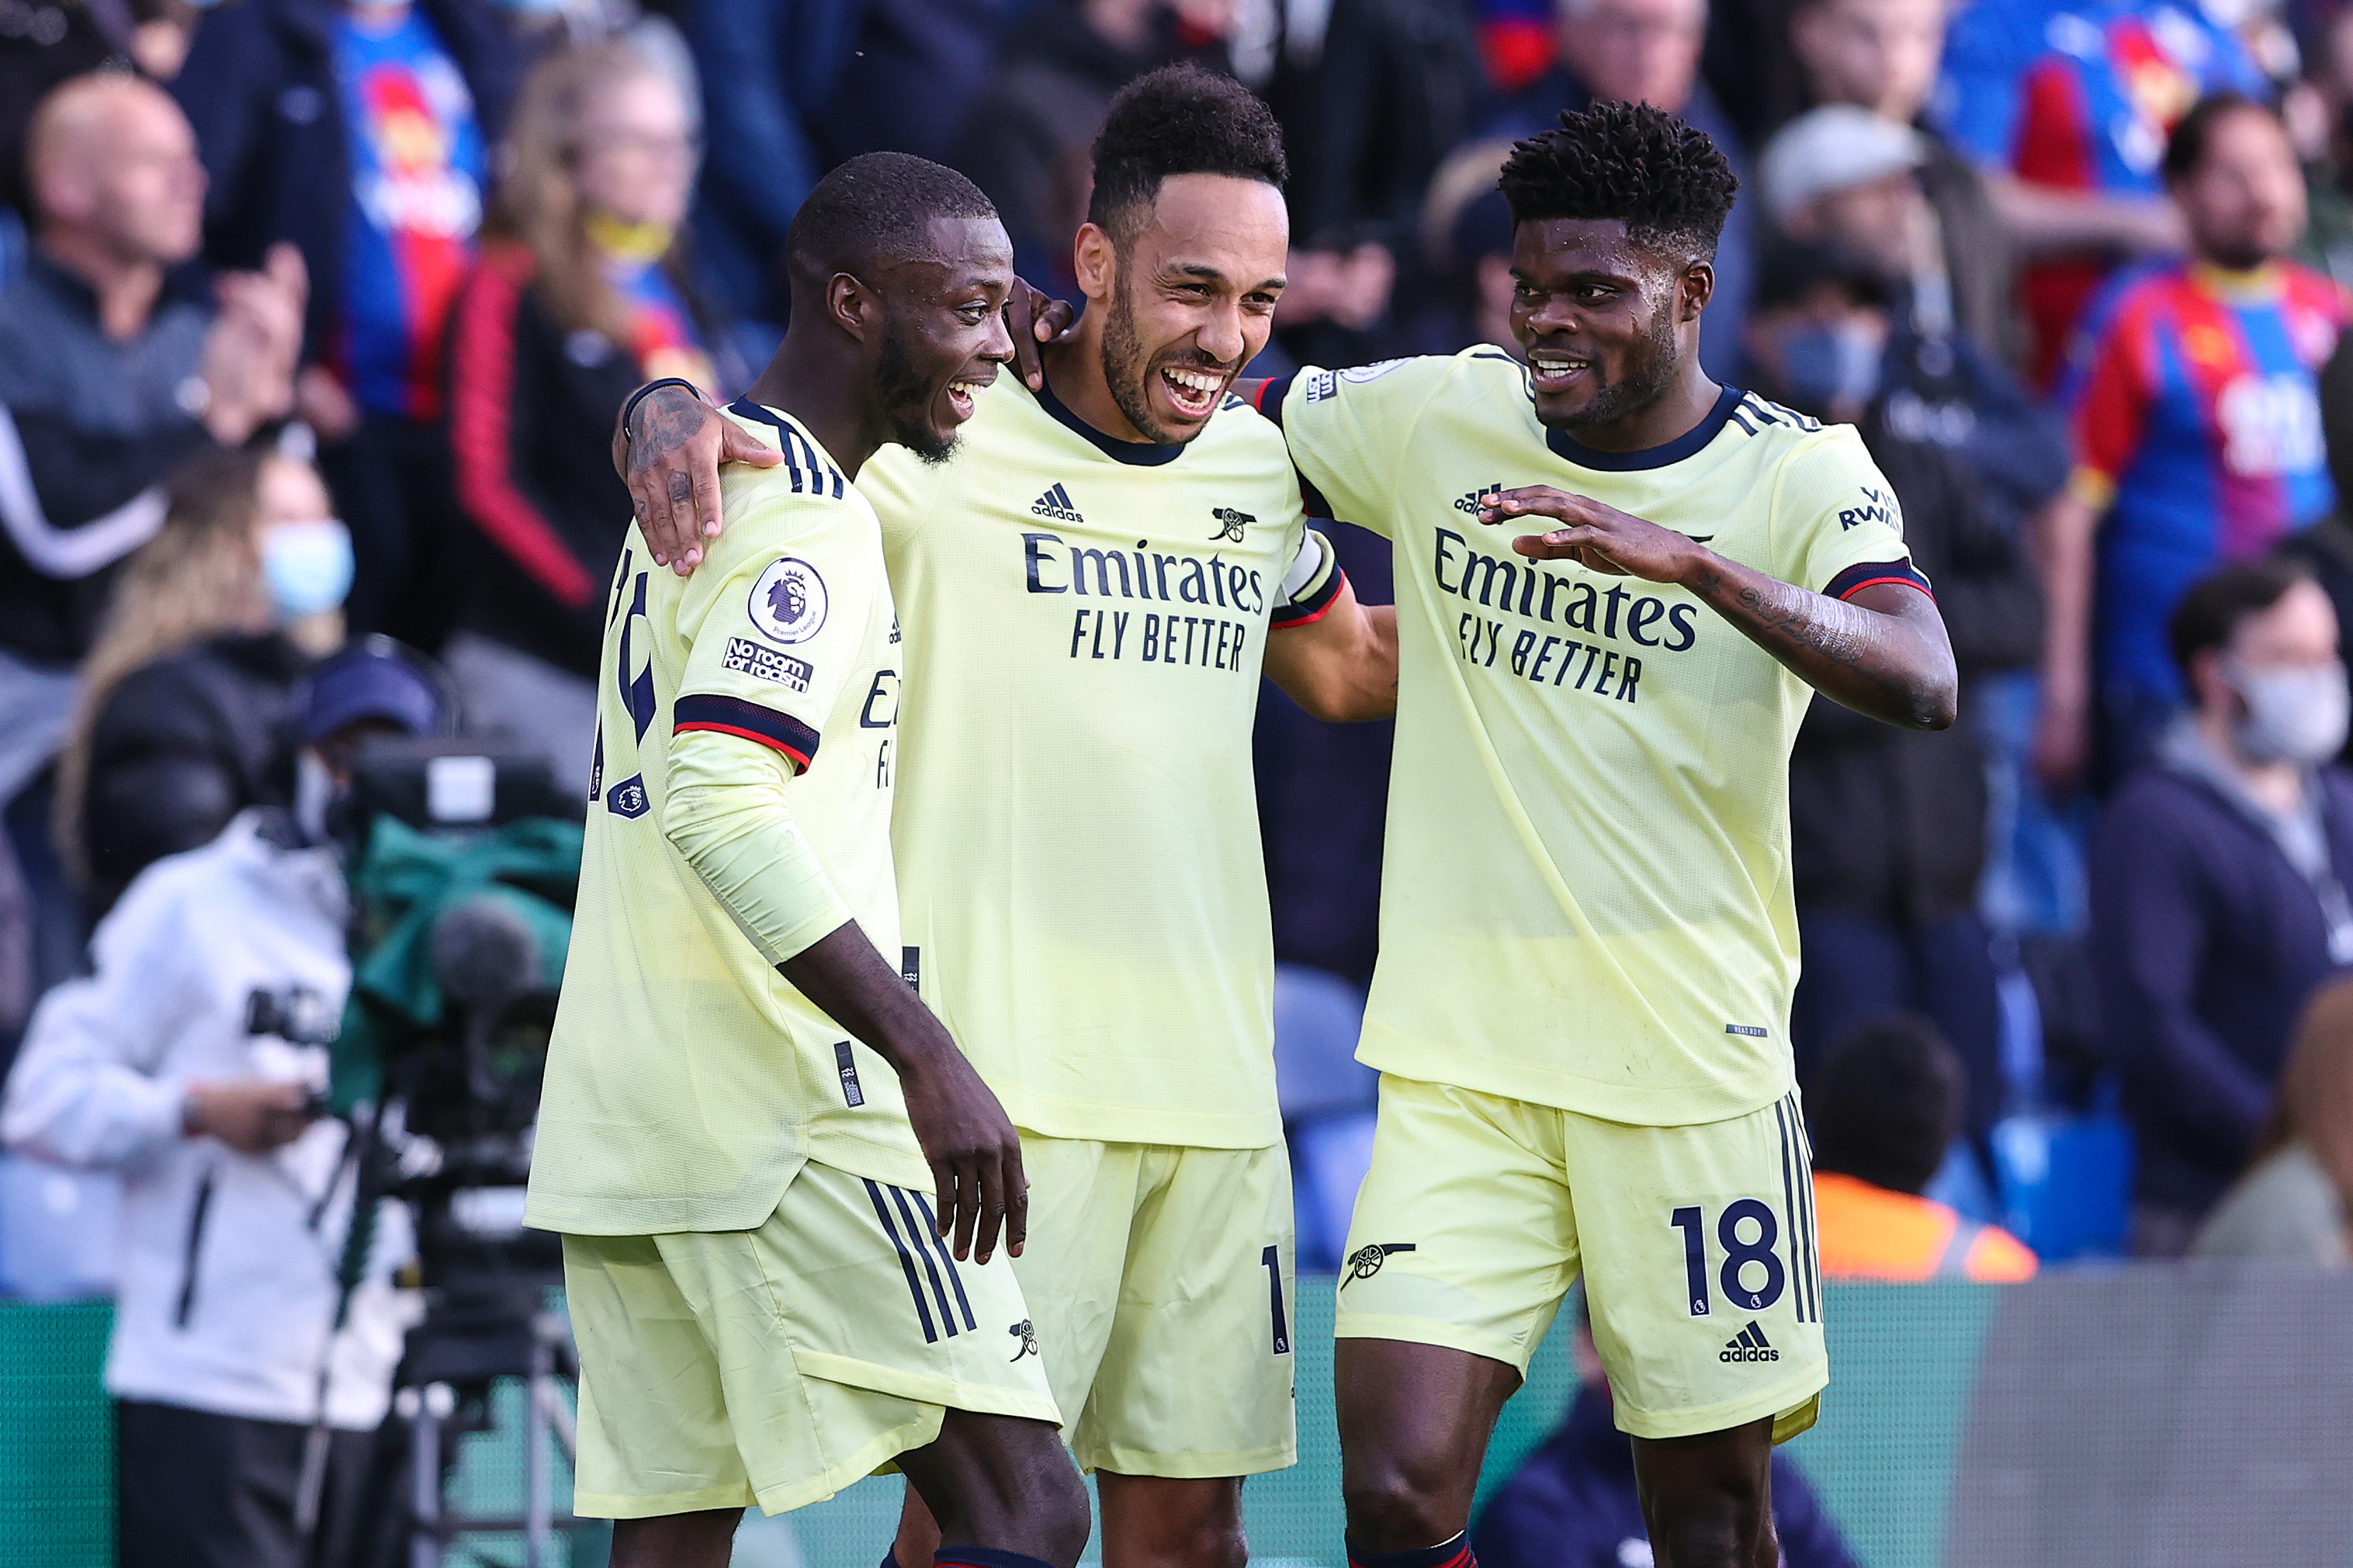 Crystal Palace 1-3 Arsenal: Pepe and Martinelli seal victory for Gunners